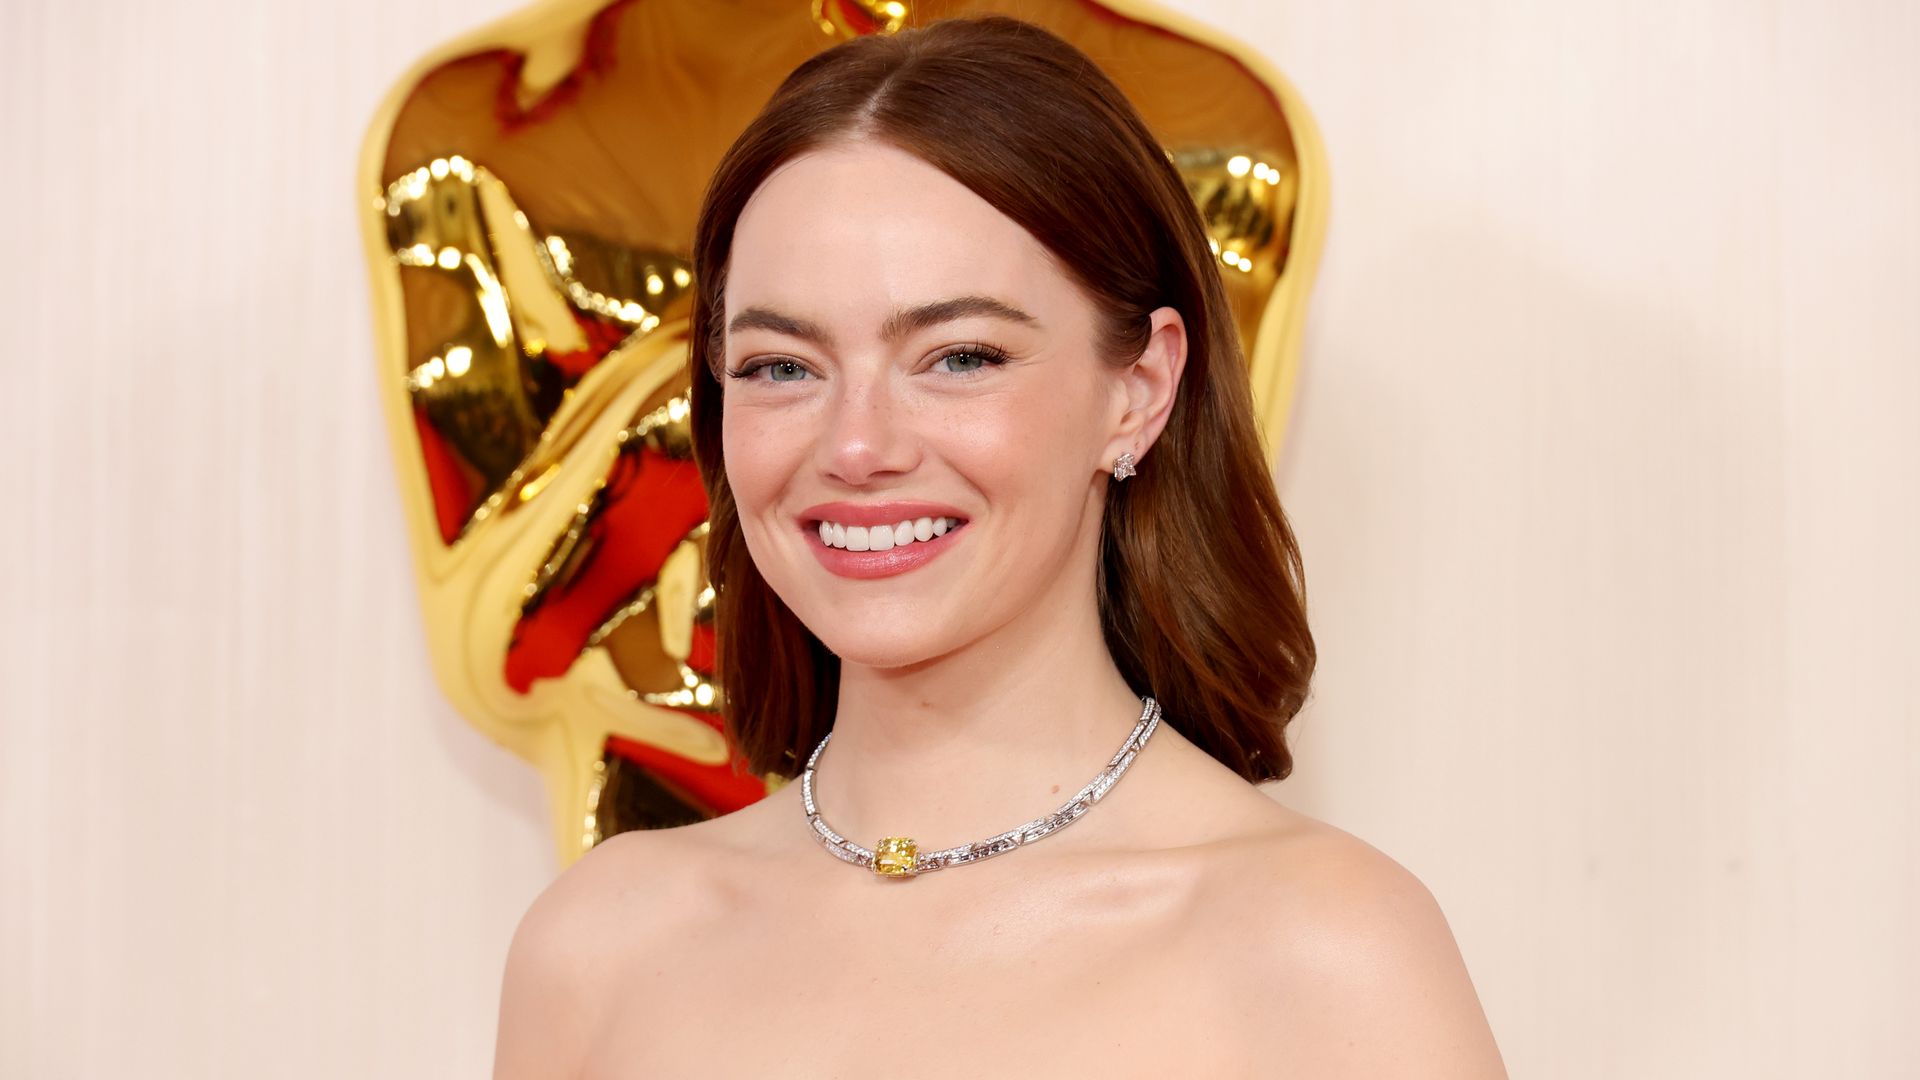 Emma Stone reveals how Oscars wardrobe malfunction 'really was my fault' in fresh comments